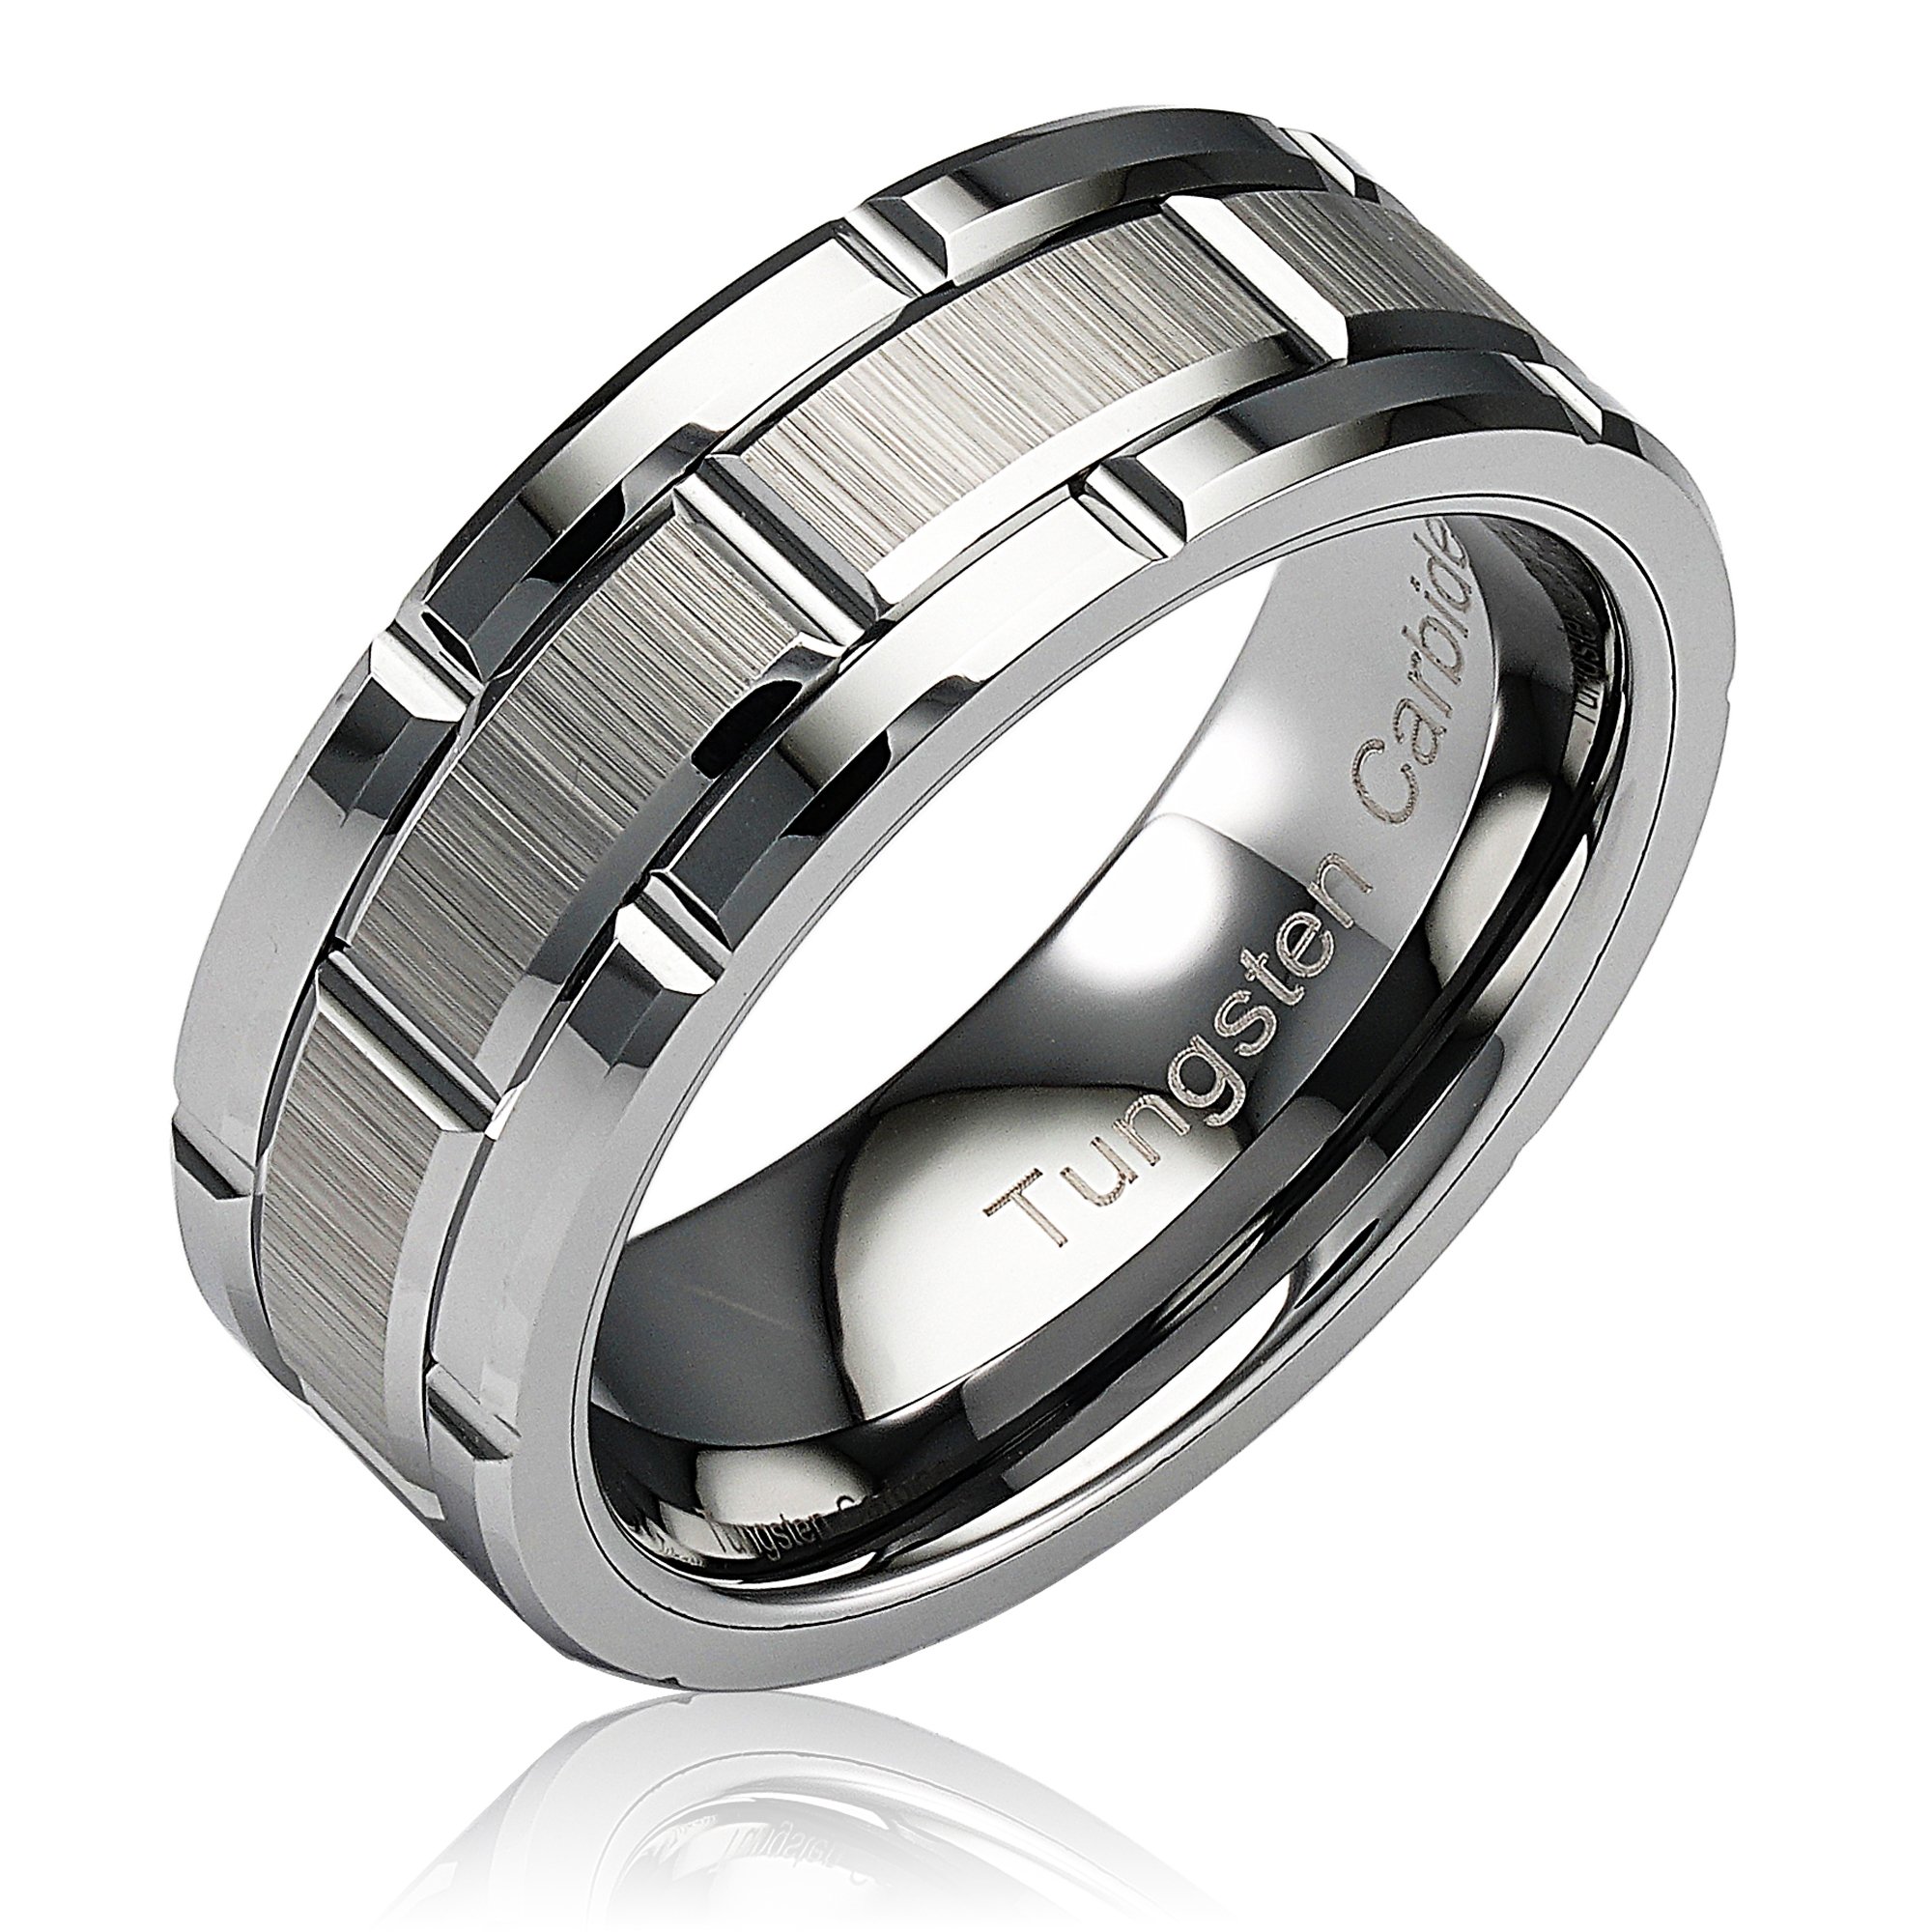 ATOP Tungsten Rings for Men Wedding Band Silver Brick Pattern Brushed